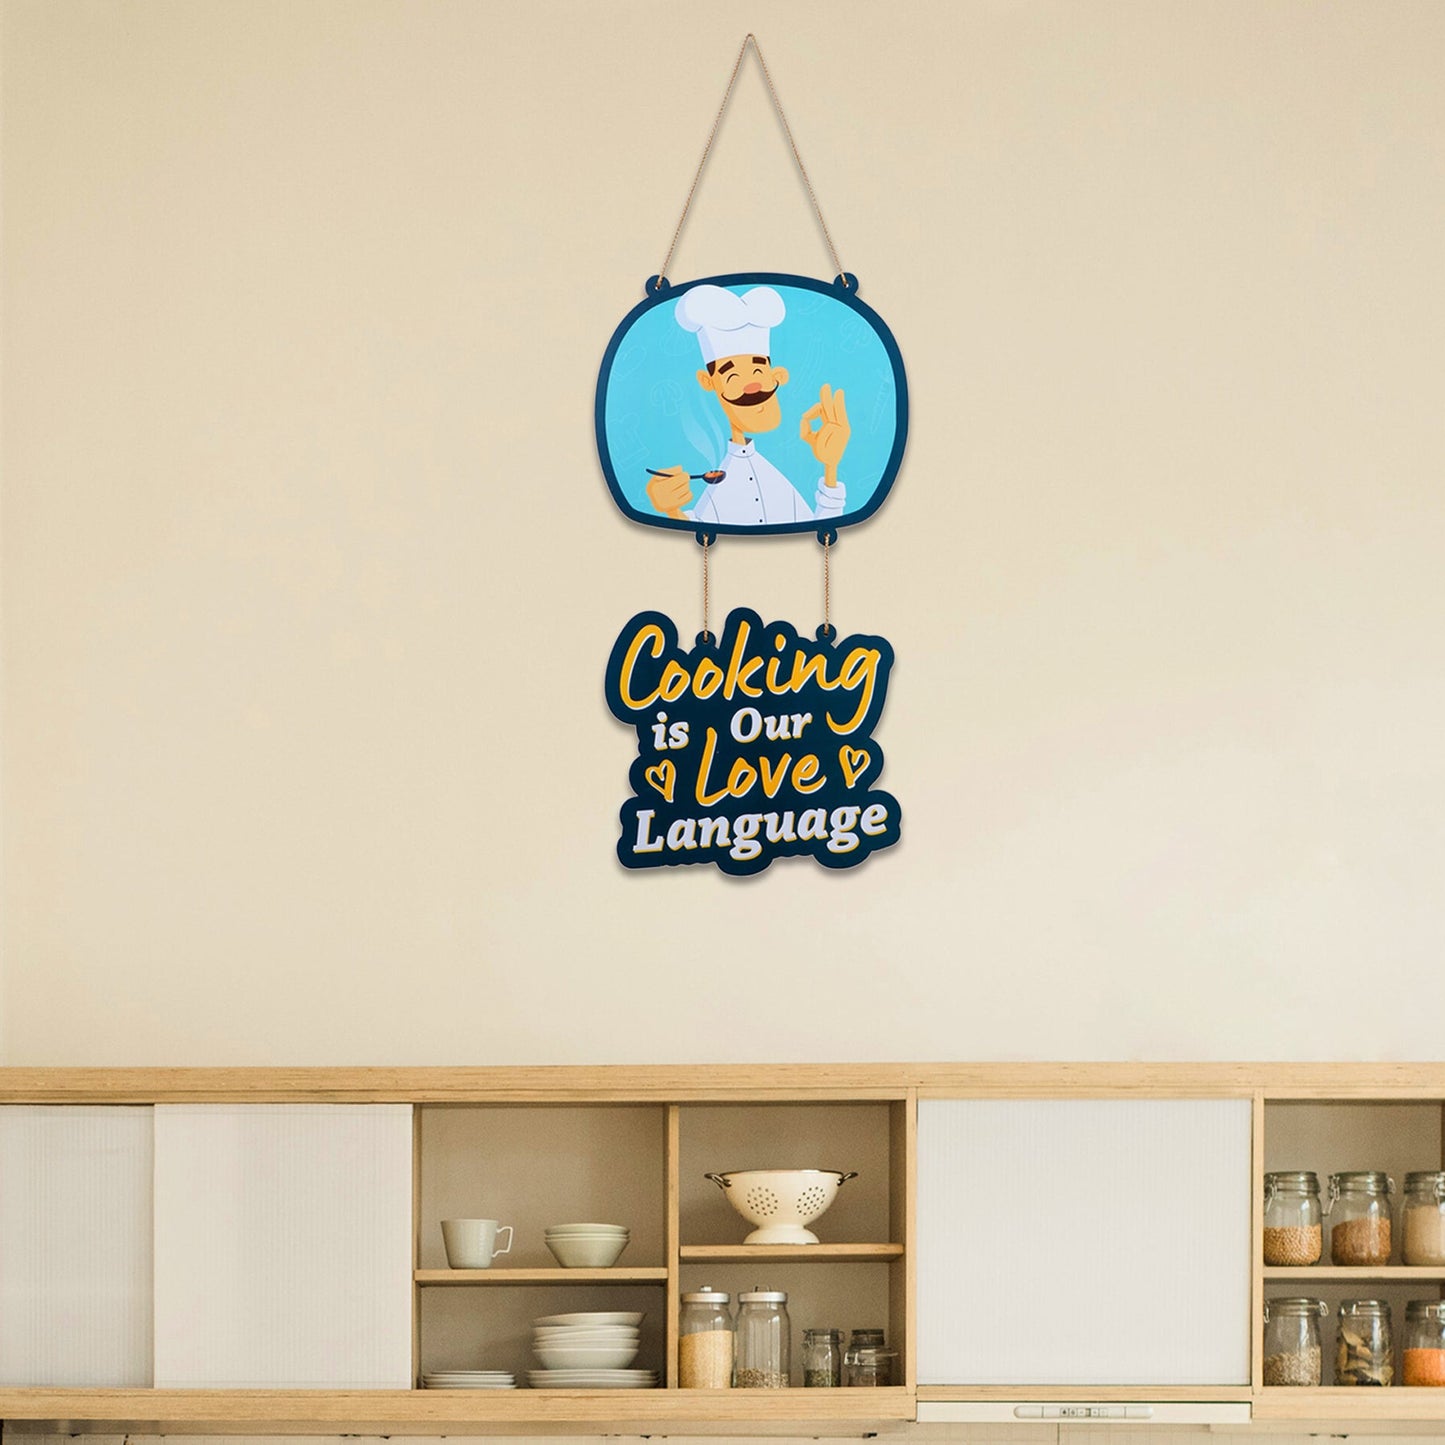 Cooking is Our Love Language Wall Hanging